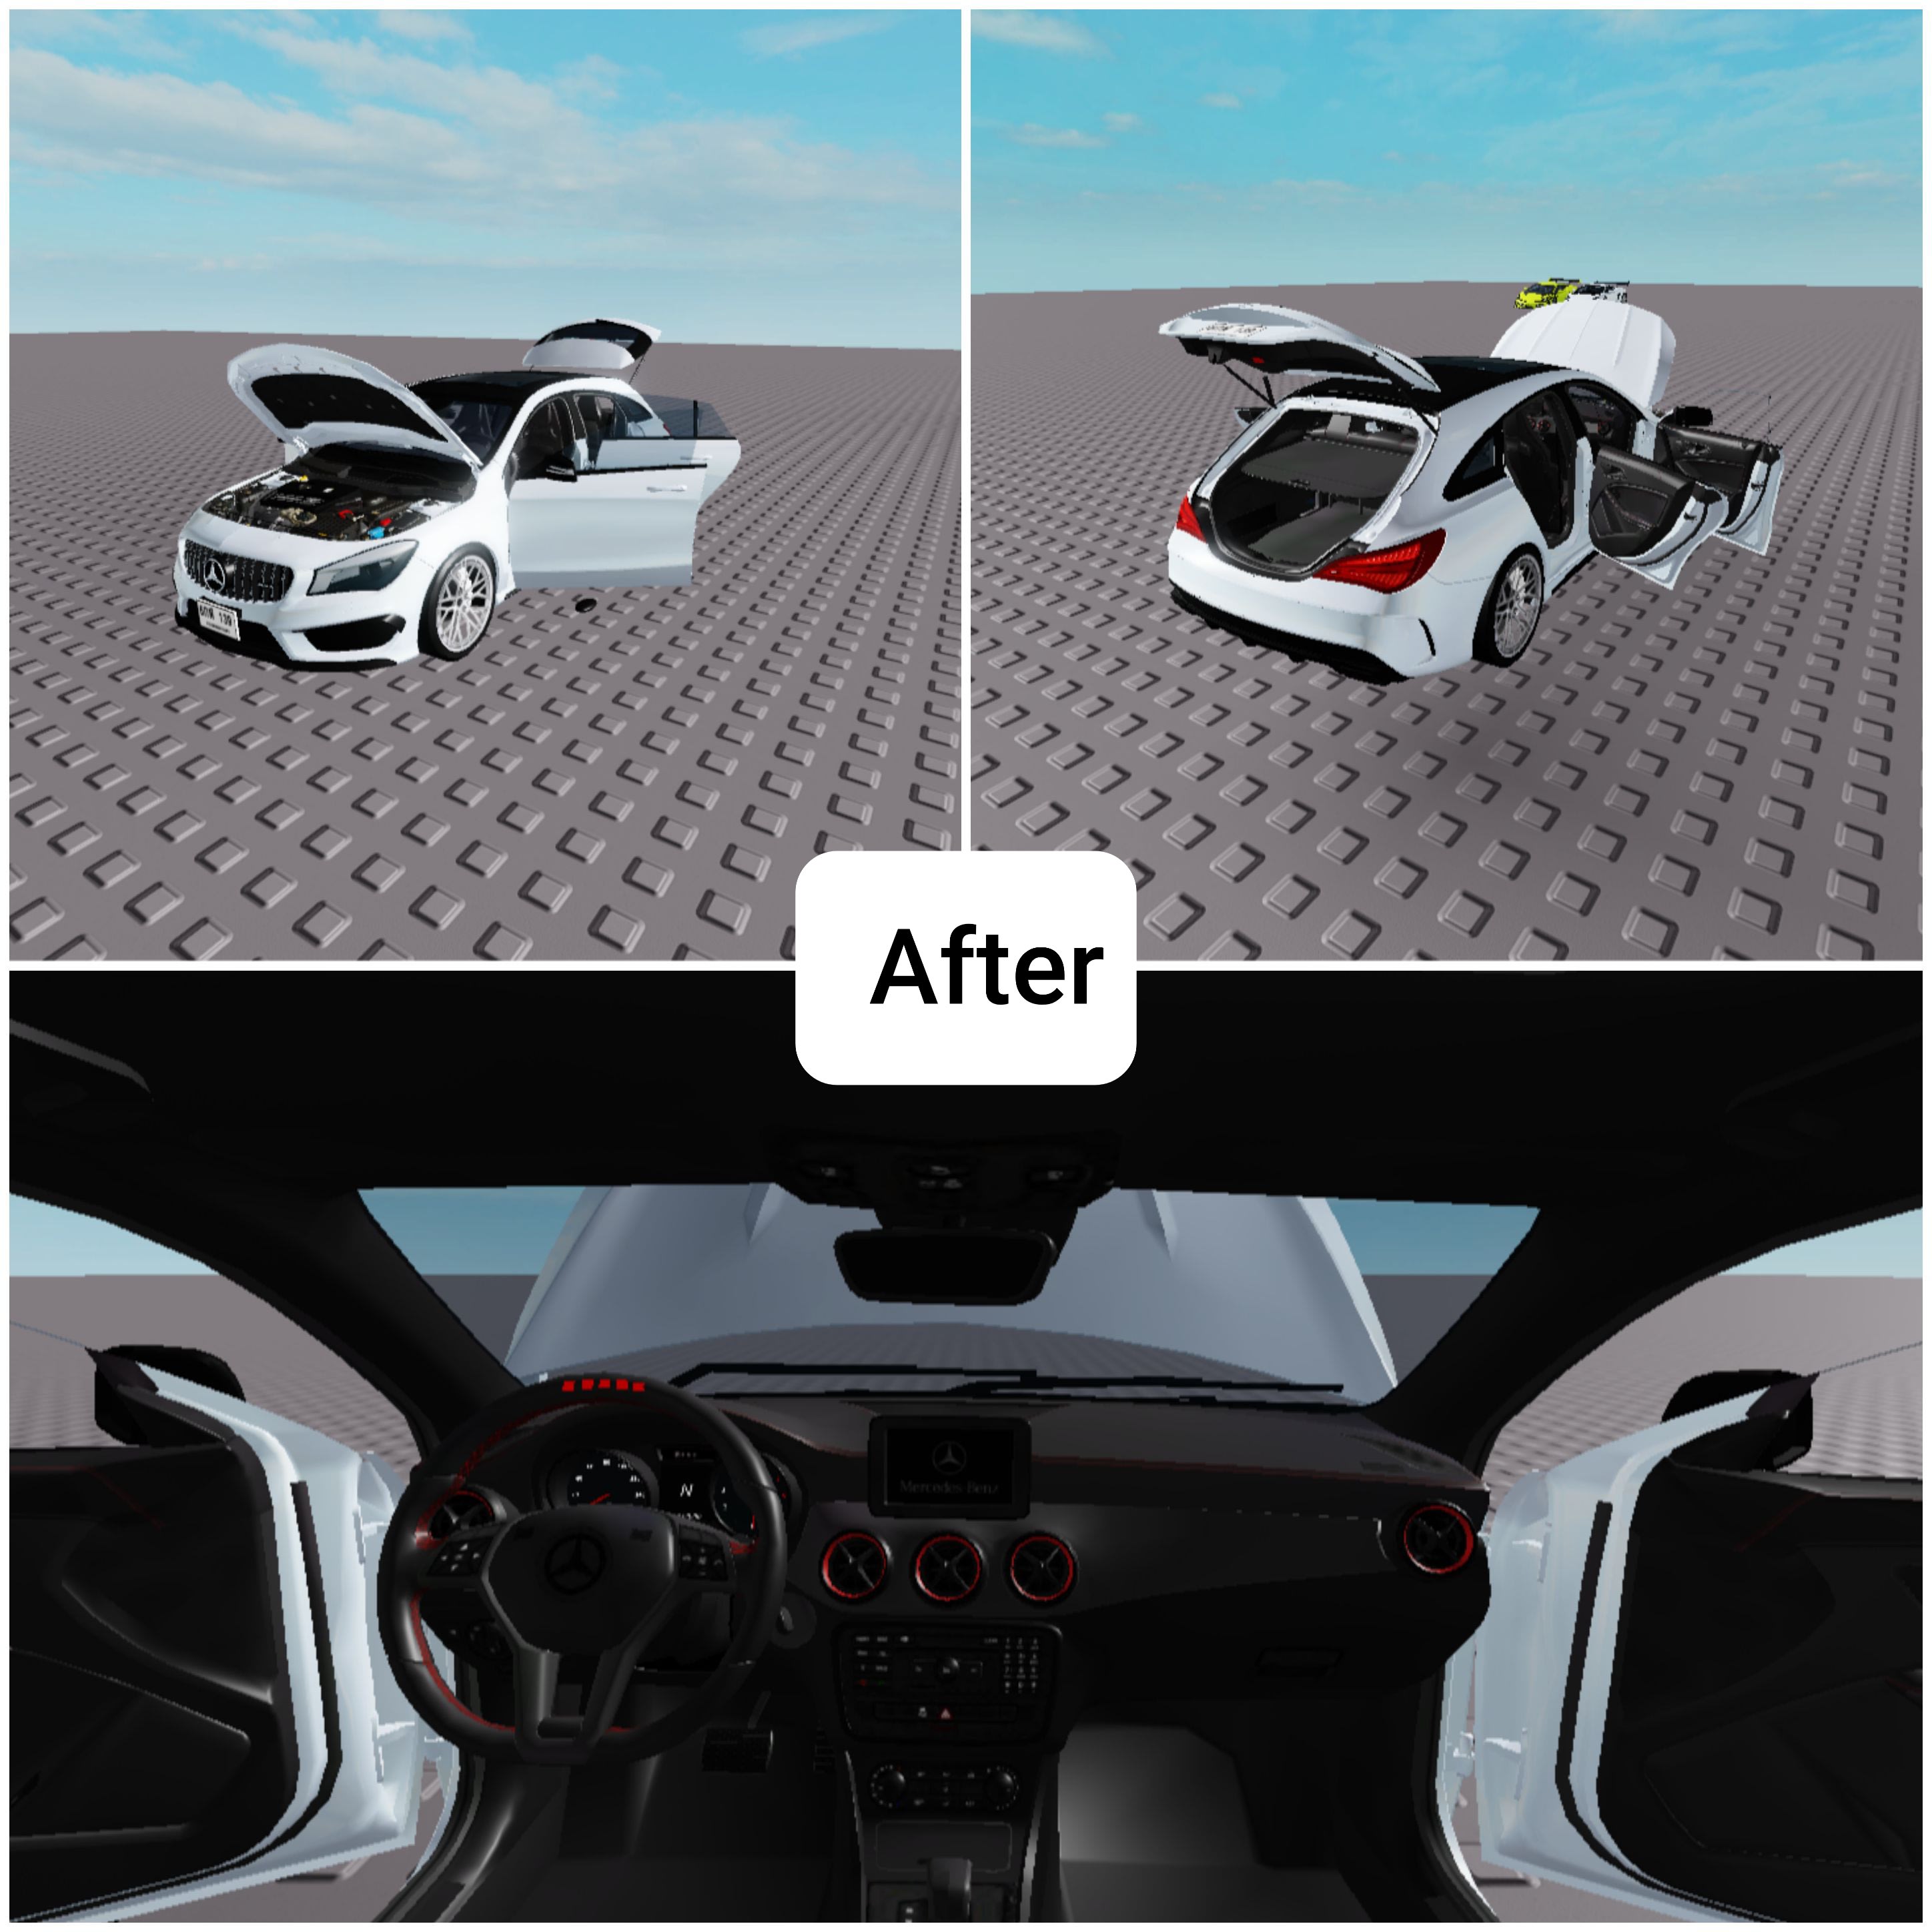 Modify Your Car Model In Roblox Studio With The Specifications You Desire By Sebastian Yeong - traffic signal in fl roblox number roblox